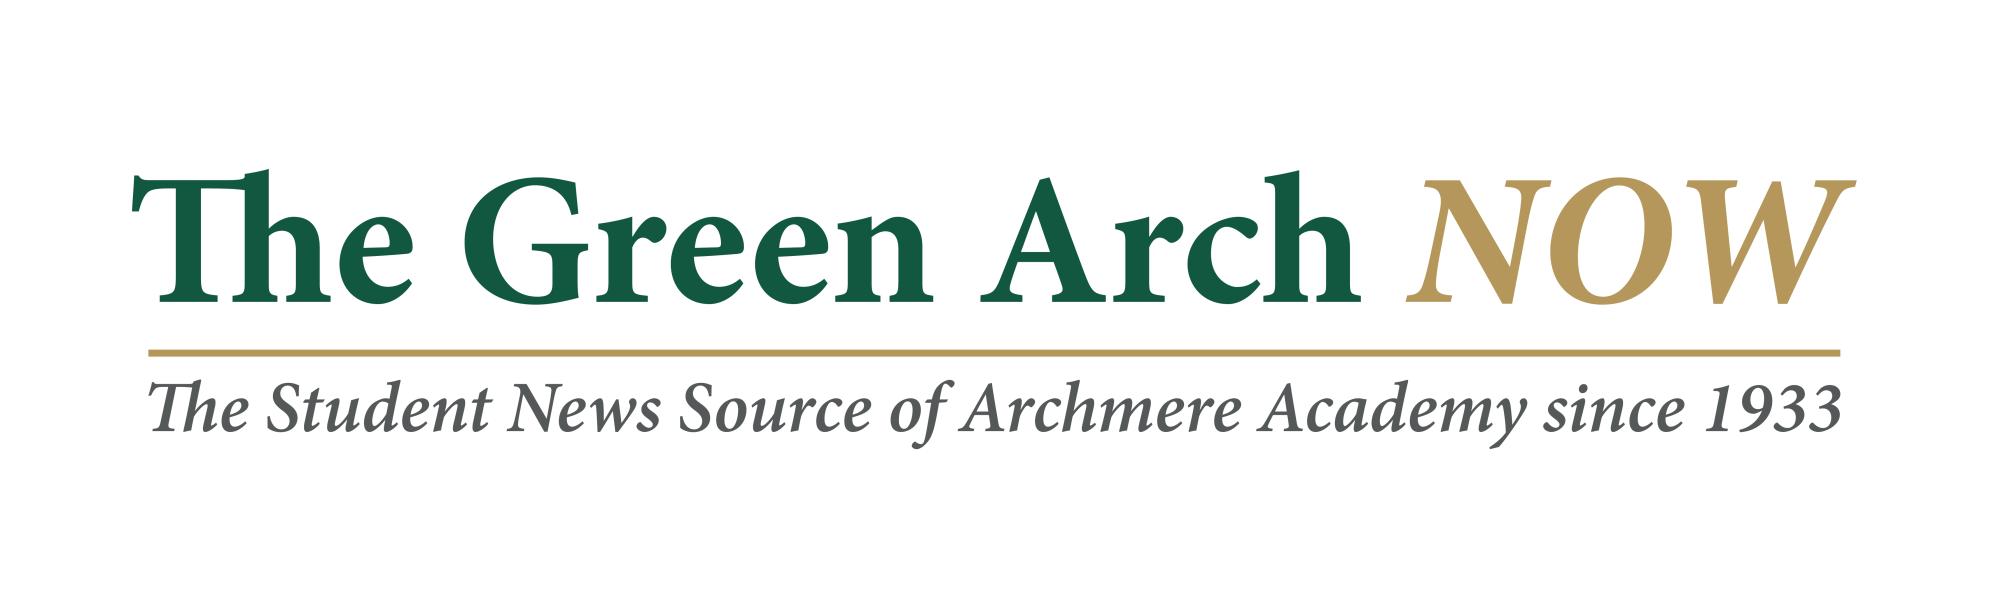 The Student News Site of Archmere Academy